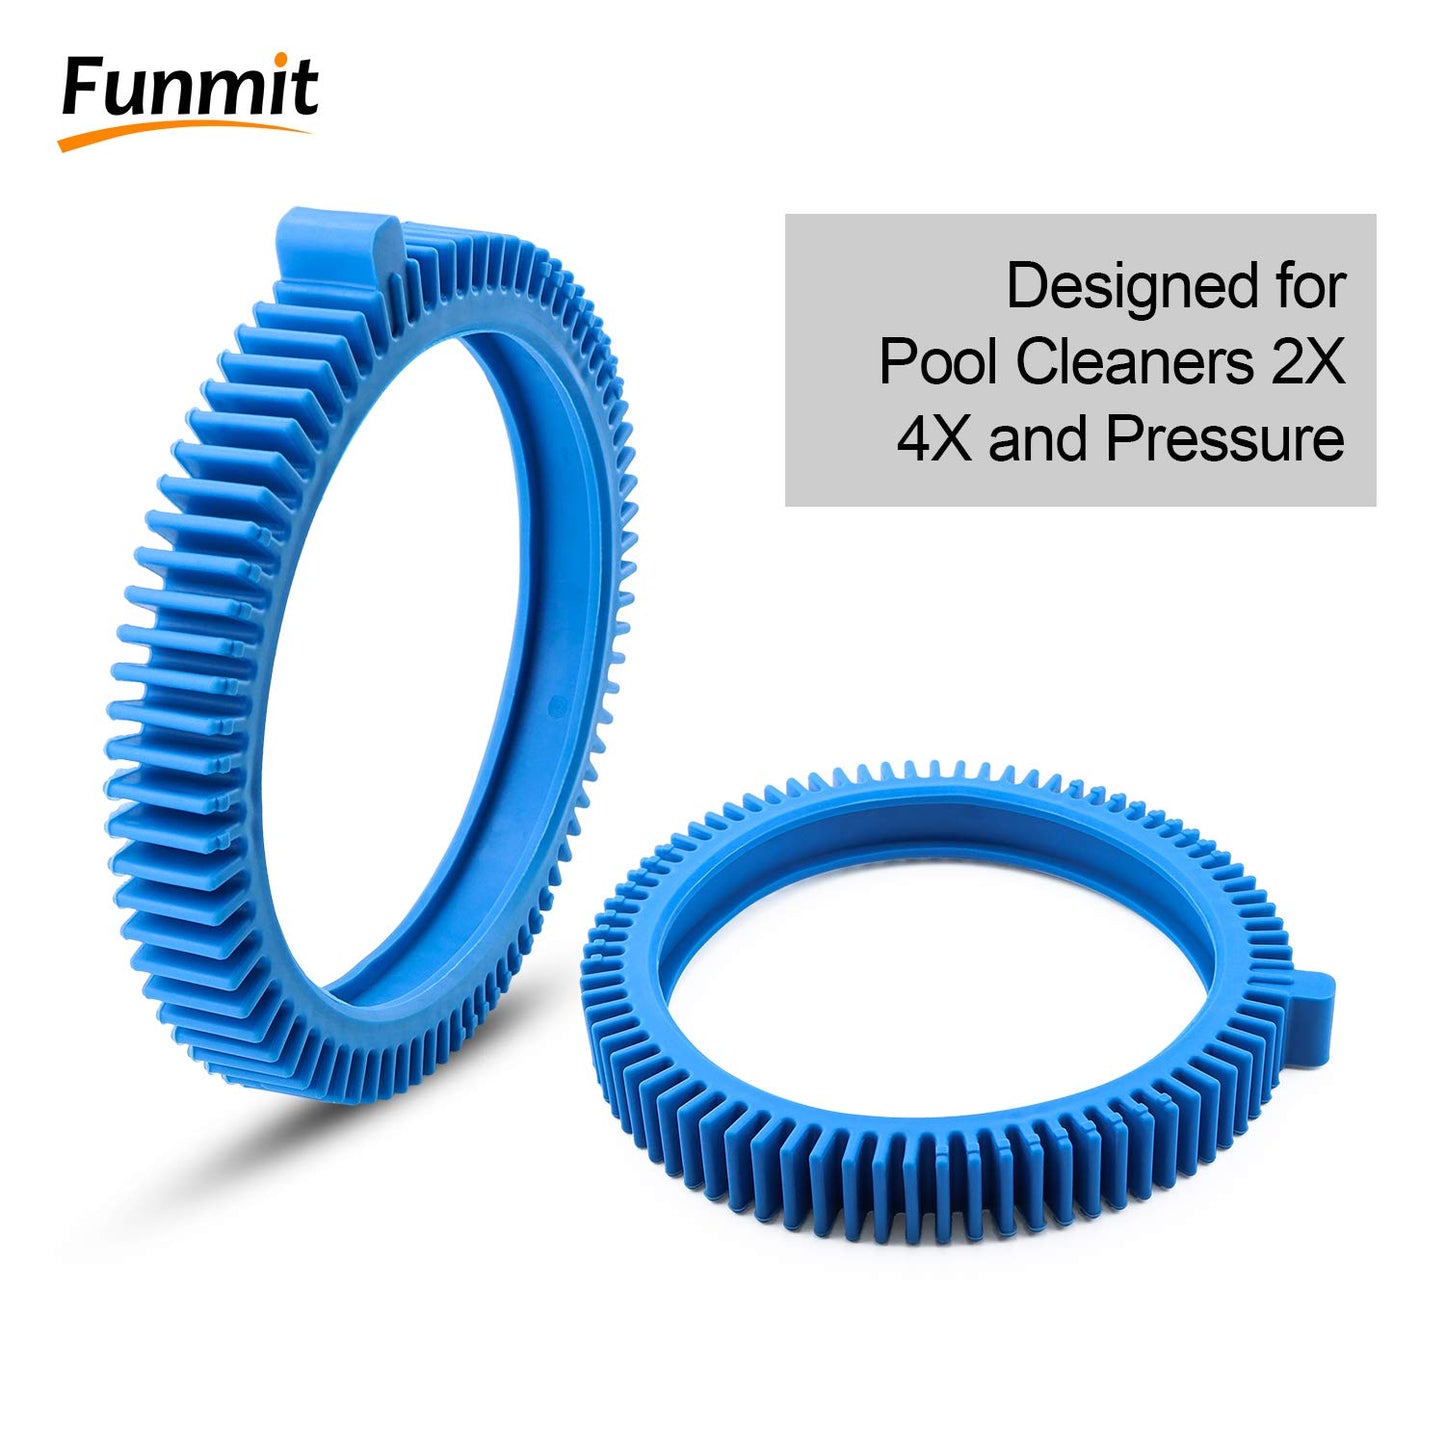 896584000-143 Blue Front Tire Kit with Super Hump Replacement for Haywood Poolvergnuegen Select Pool Cleaners and Perfectly Compatible with Hayward Phoenix Cleaners (2 Pack)